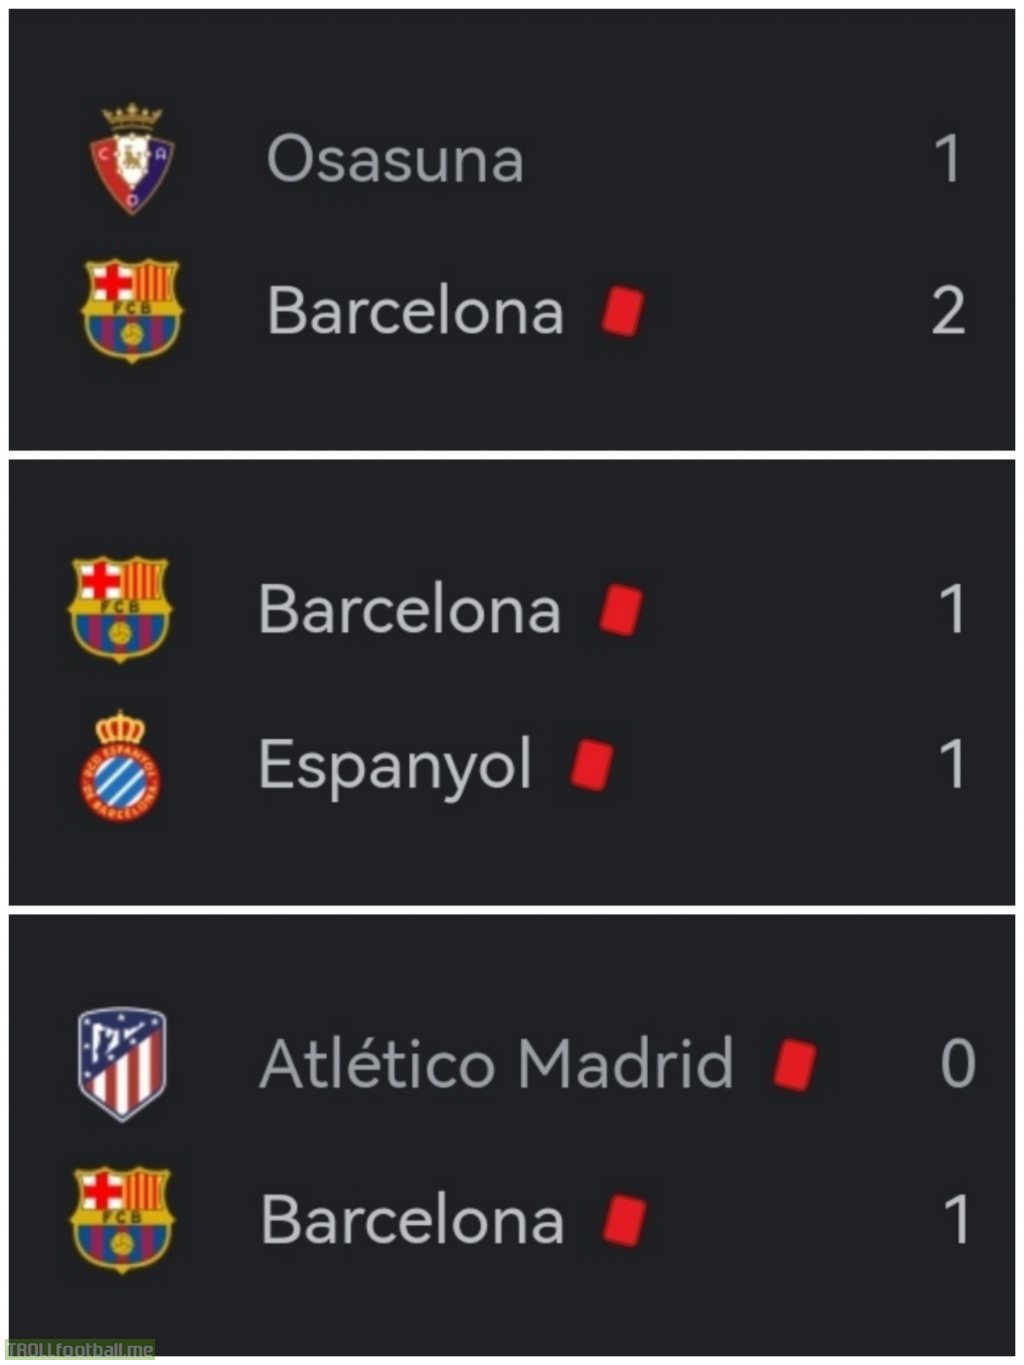 In Barcelona's last 3 La Liga matches, a total of 6 red cards were given. 4 to Barcelona and 2 to the opposition.